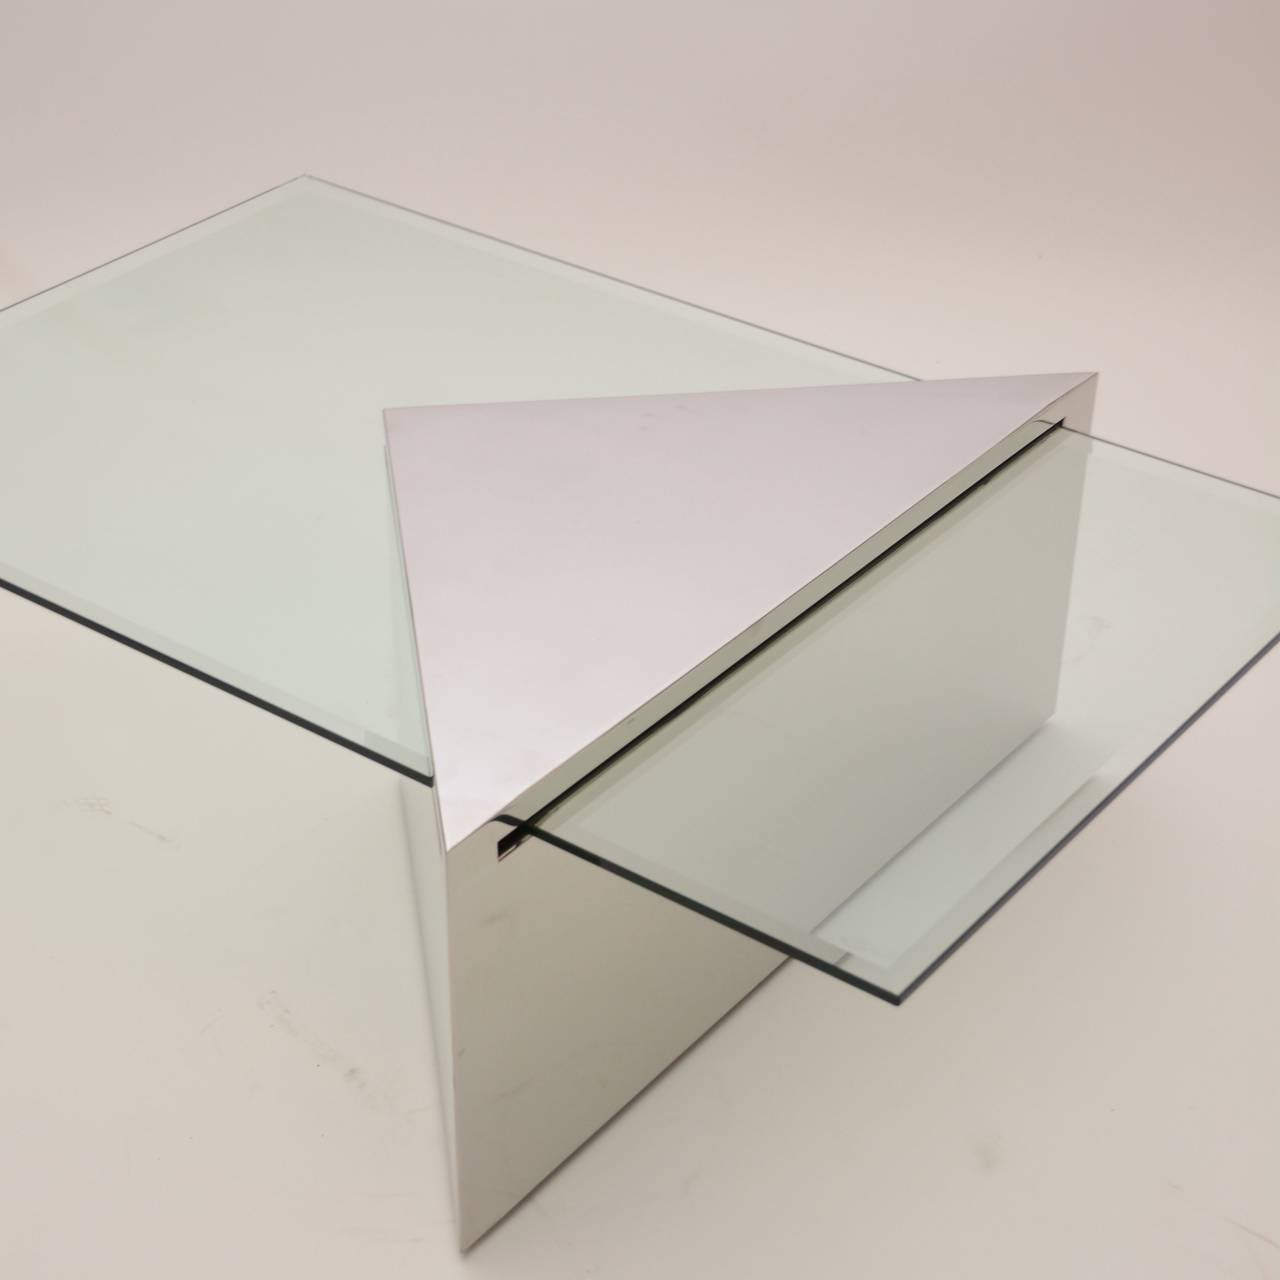 Stainless Steel Brueton Triform Coffee Table designed by J. Wade Beam